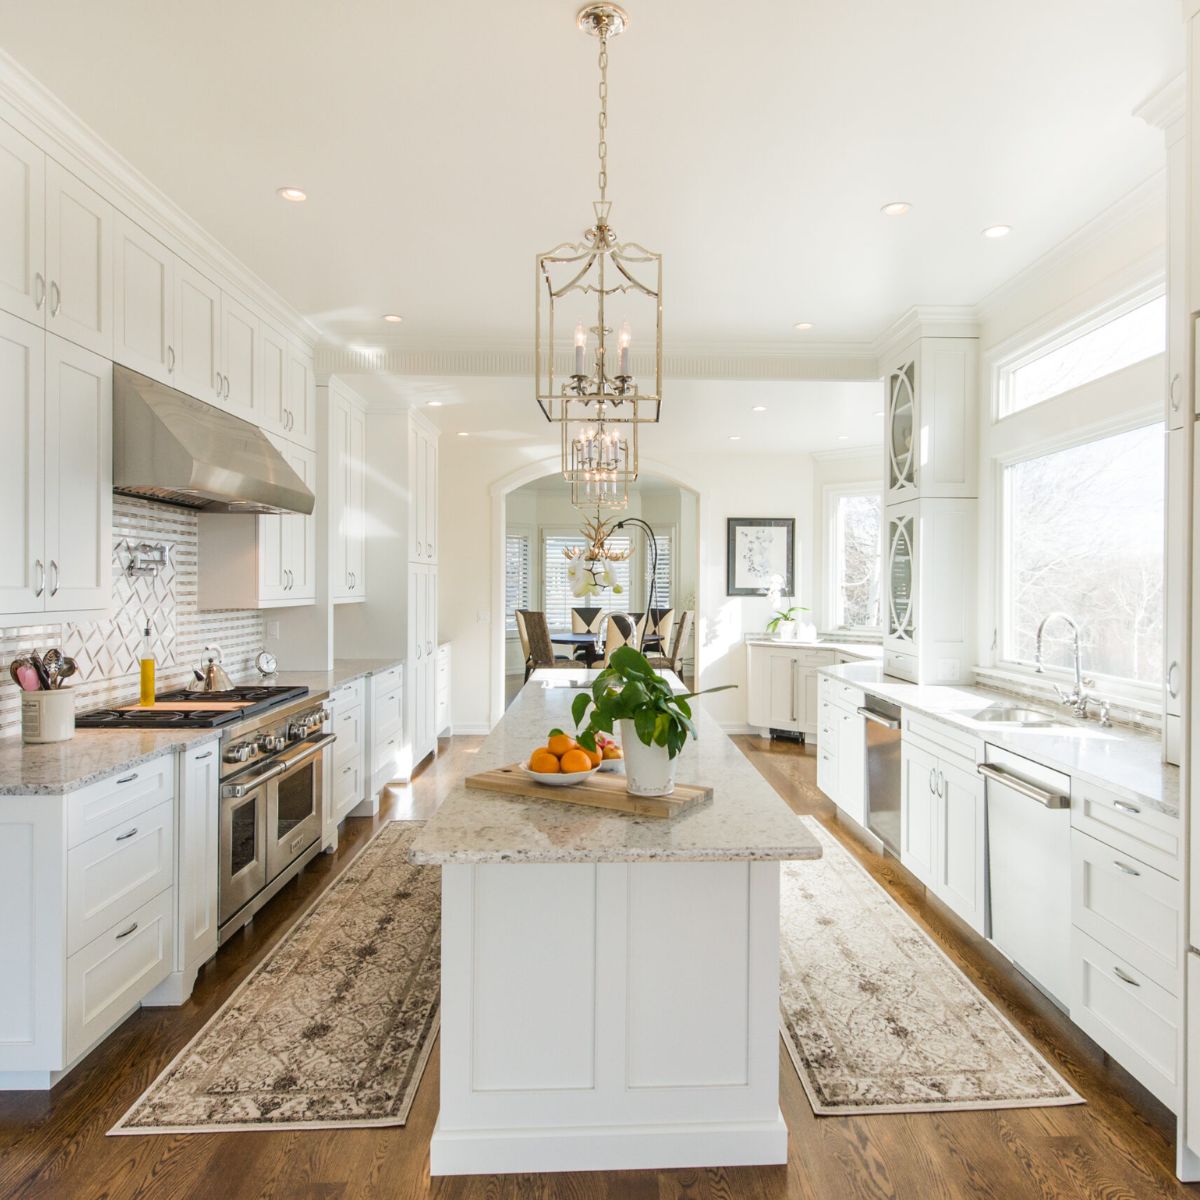 5 Pros and Cons of White Kitchen Cabinets